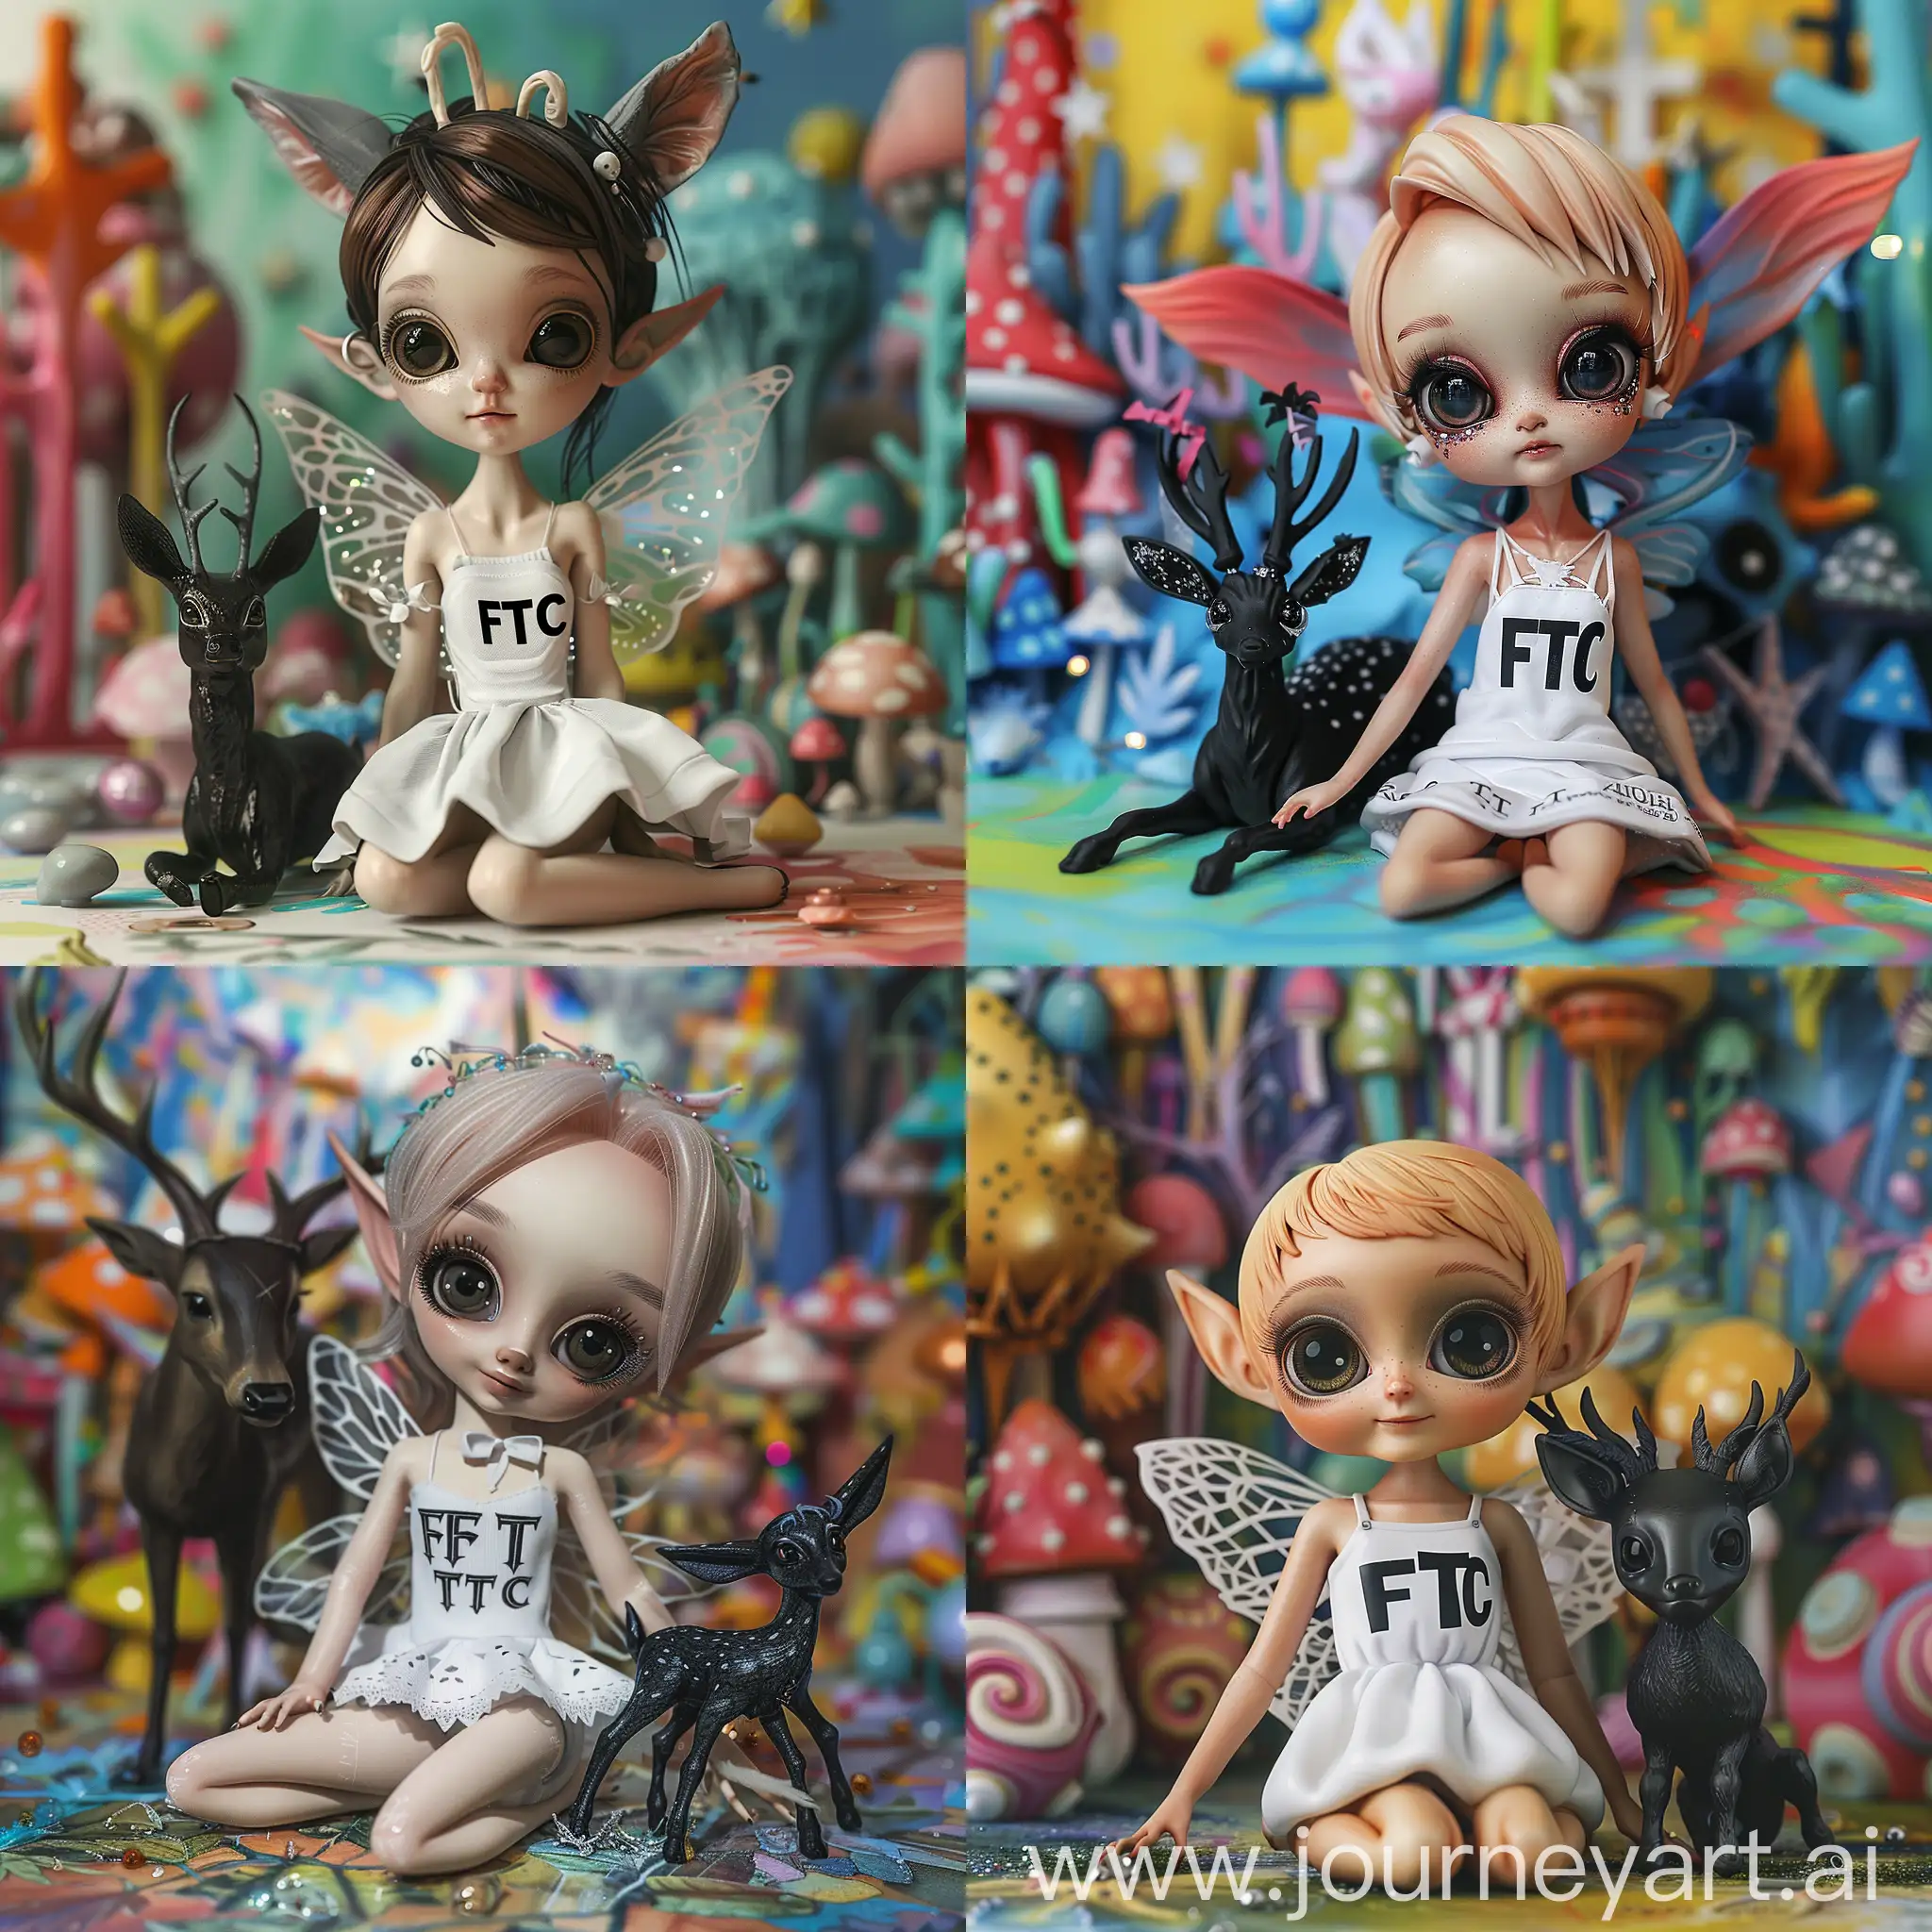 Pixie-Fairy-with-FTC-Print-Dress-Sitting-with-Black-Deer-in-Nathalie-Shau-Gothic-Style